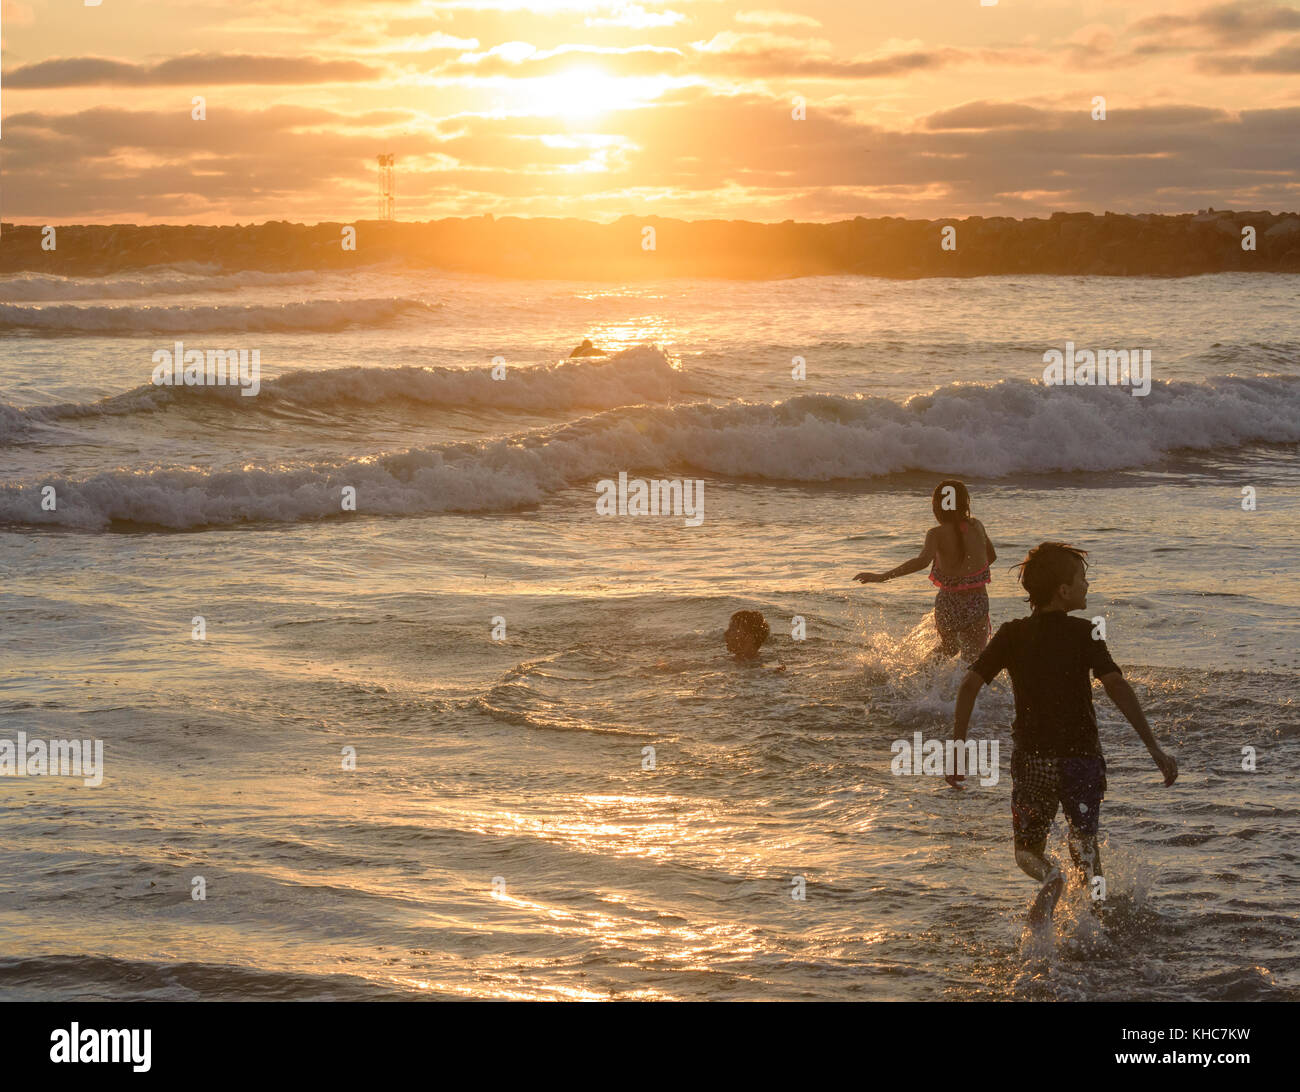 Kids play in the surf at sunset, Ocean Beach california Stock Photo